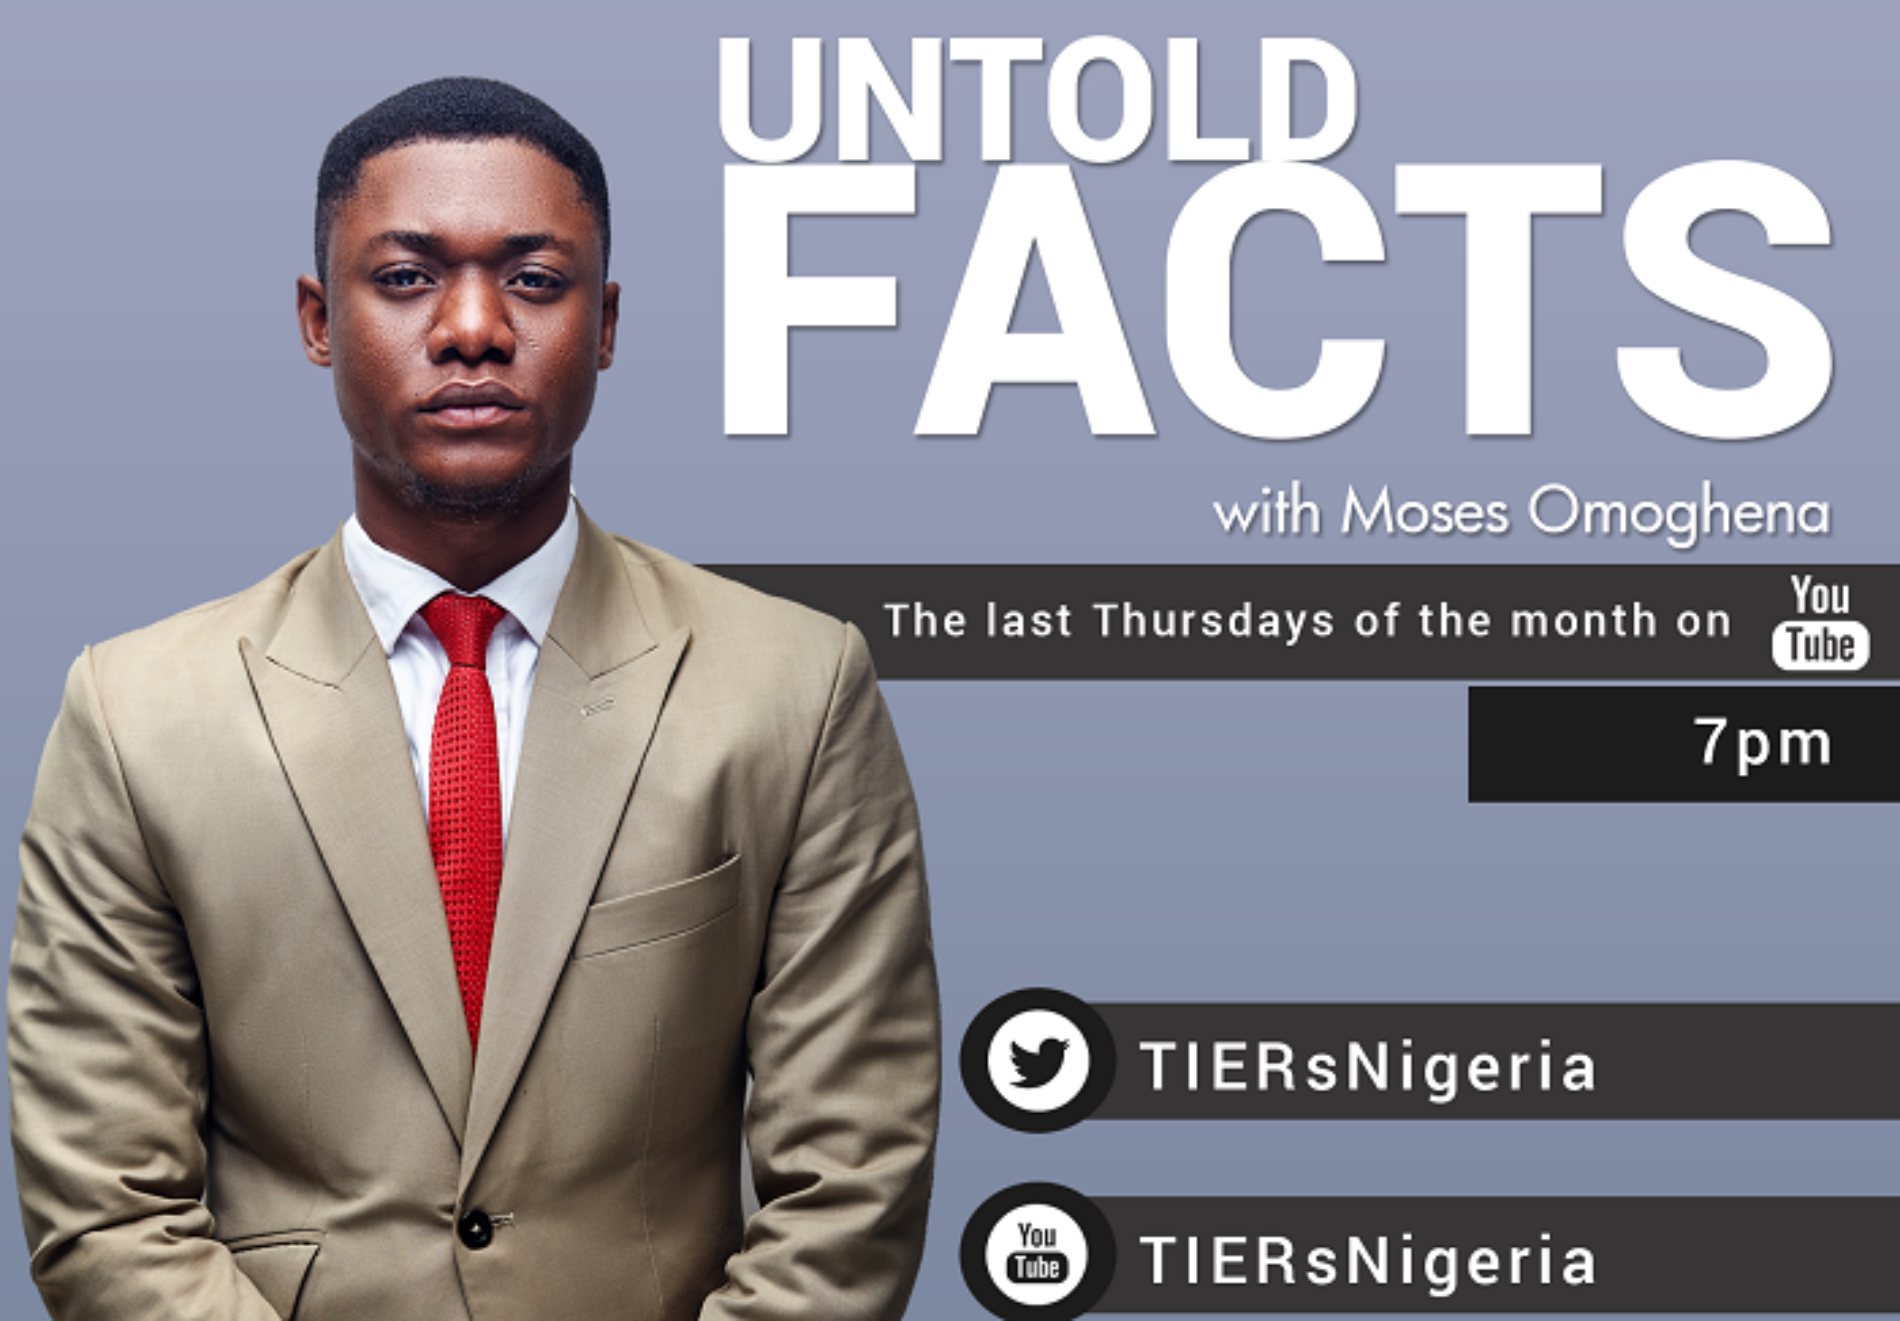 TIERs presents ‘UNTOLD FACTS’ by Moses Omoghena